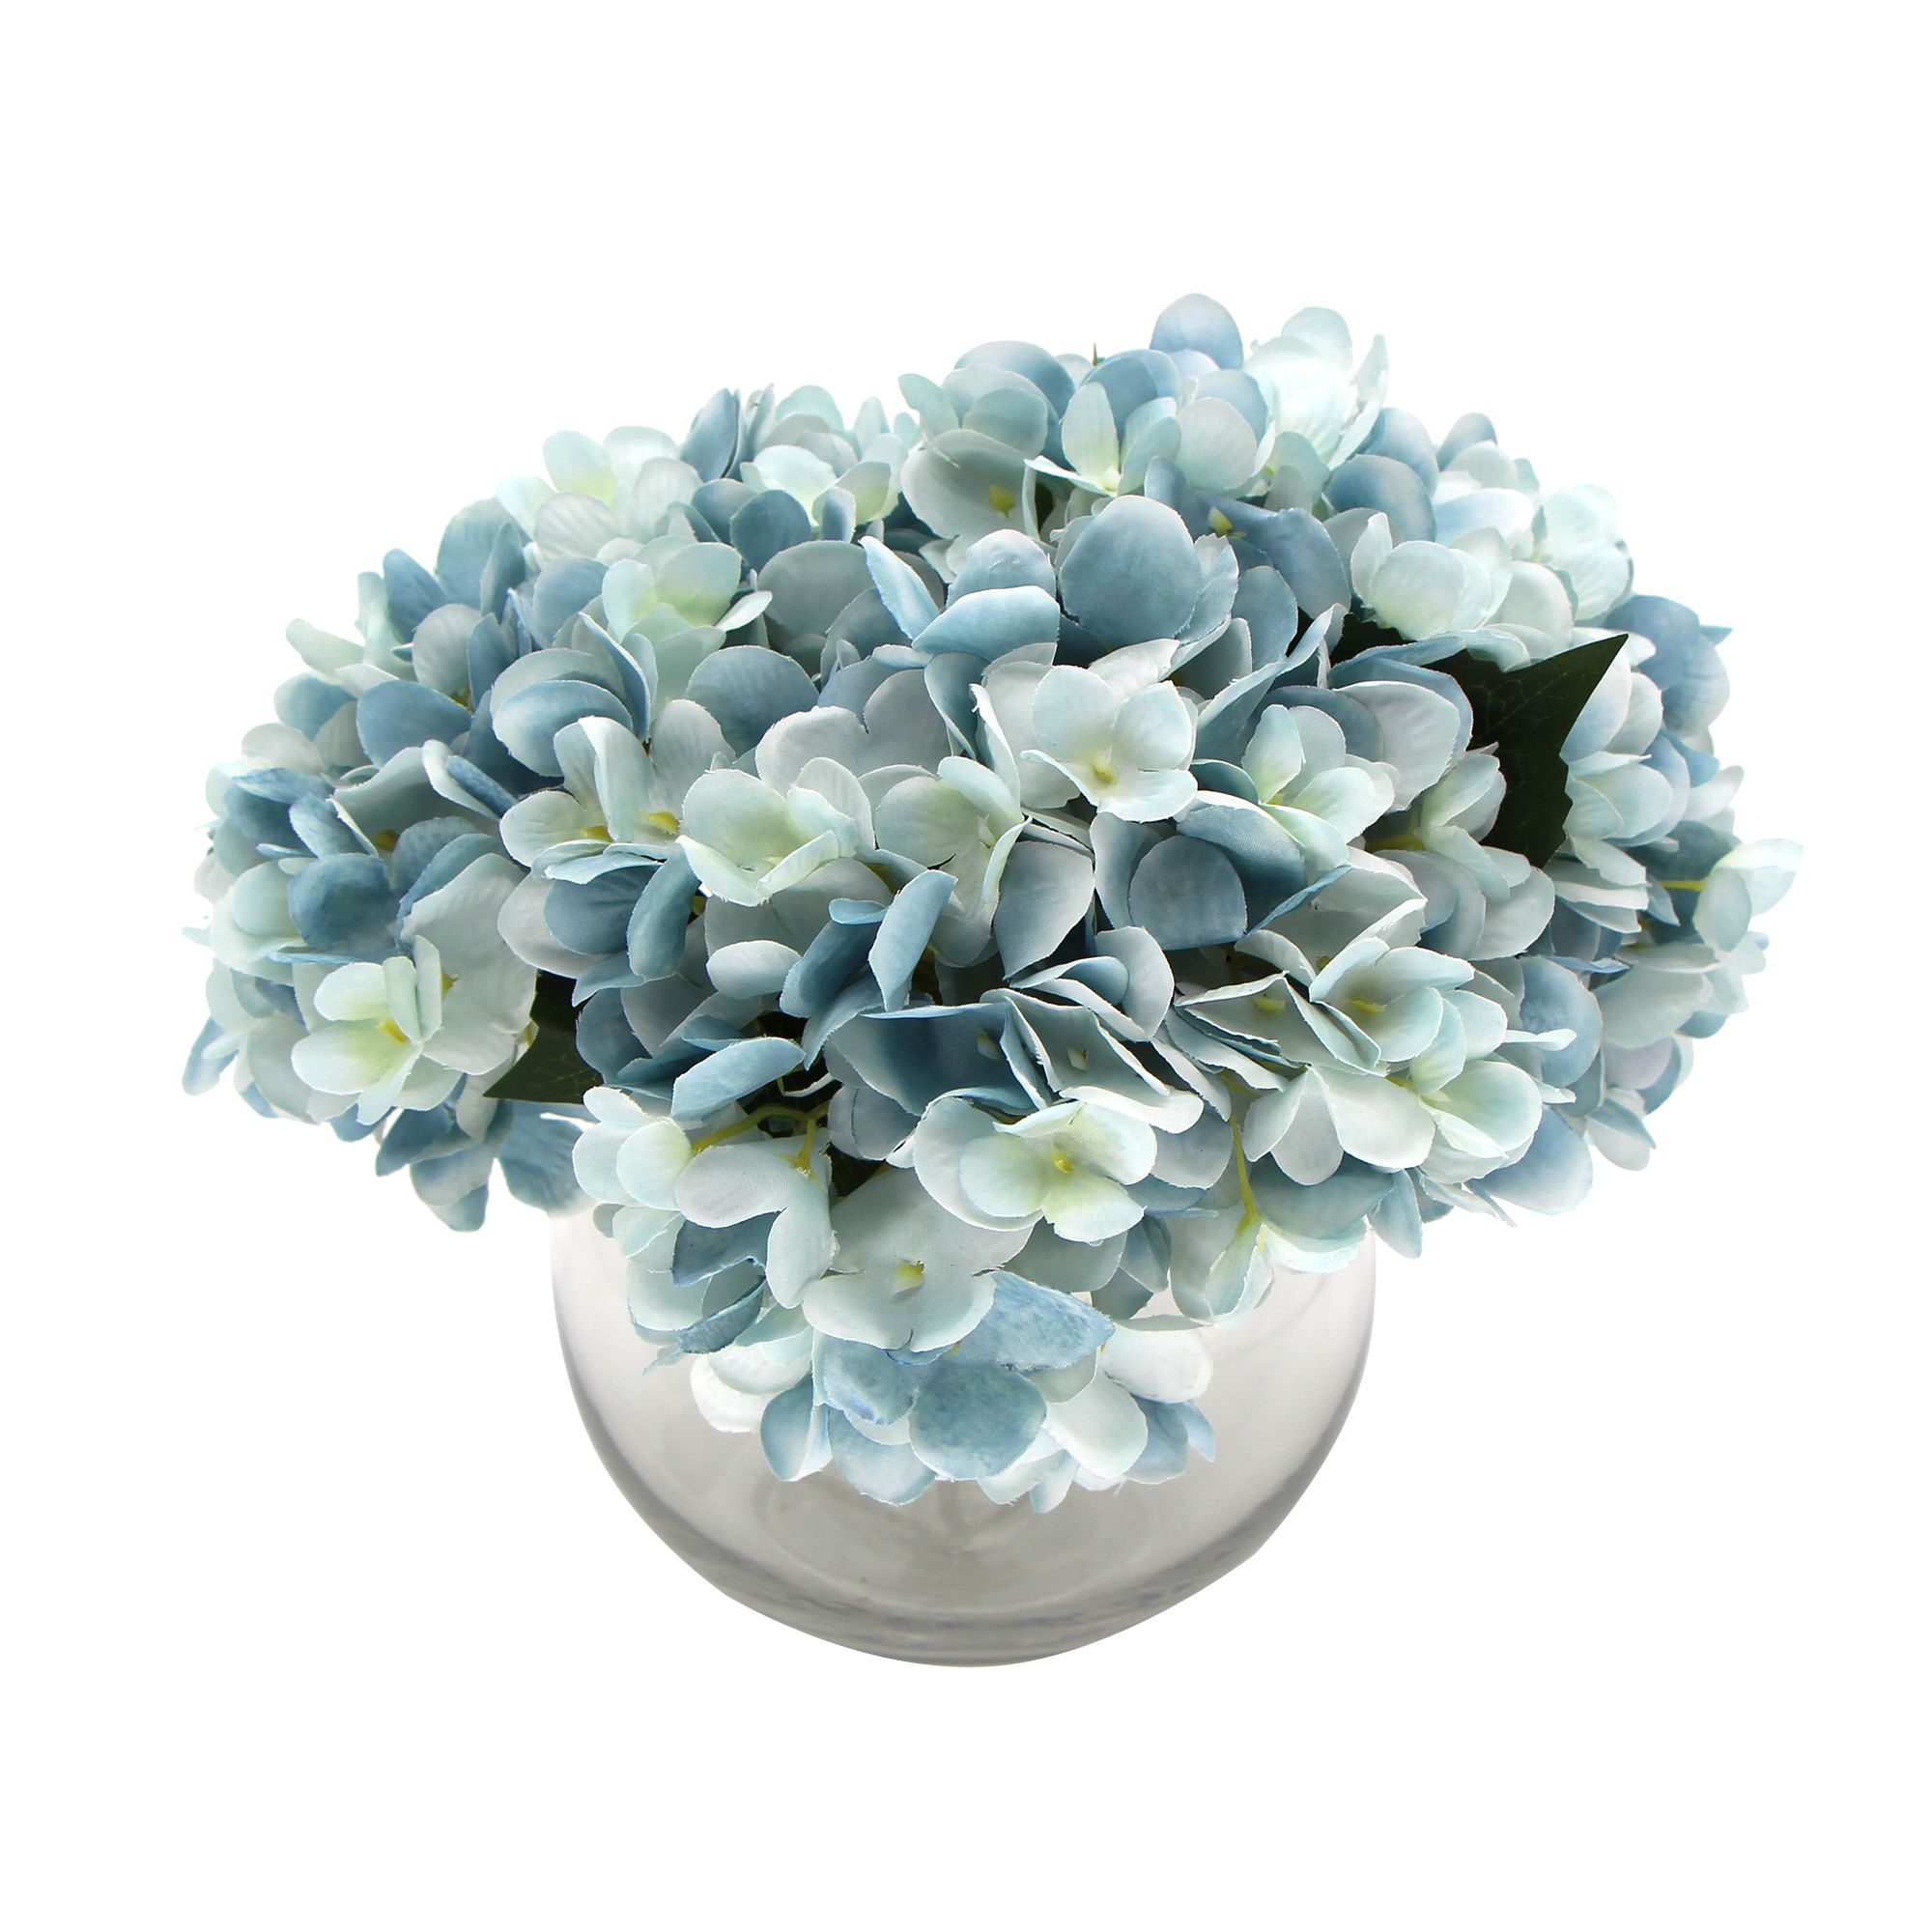 Premium Faux Hydrangea With Glass Vase (Artificial Flowering Hydrangea) 23cm – Green and Blue